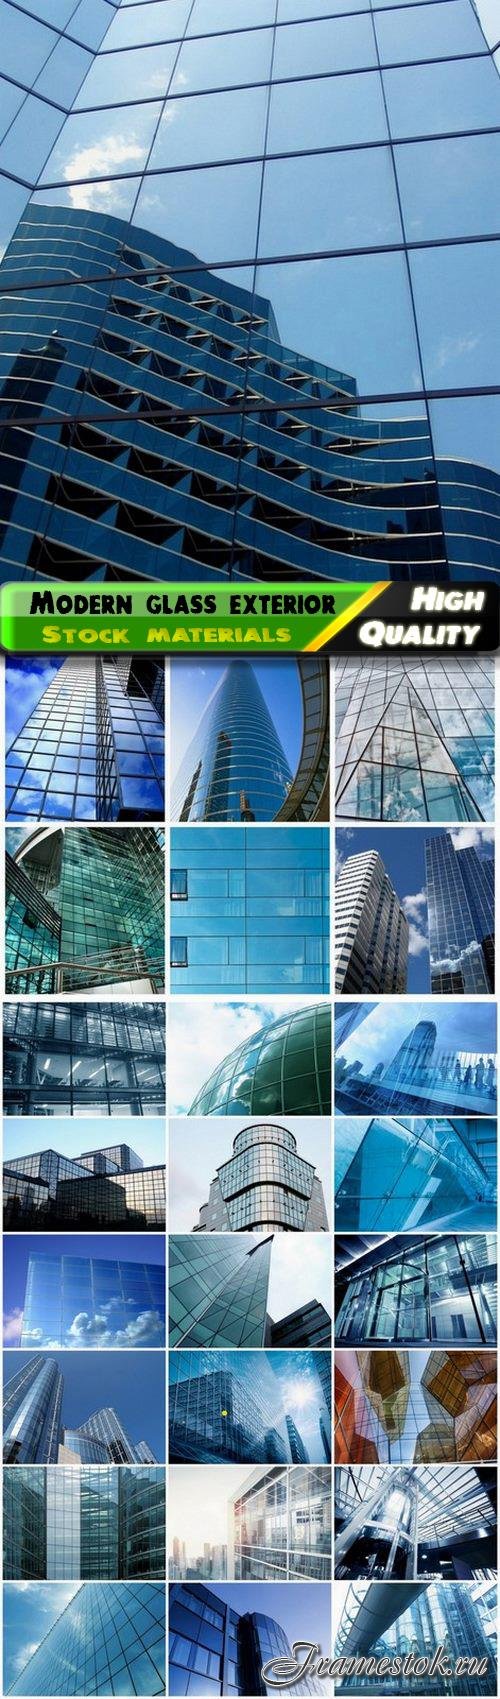 Modern exterior of glass building and office skyscraper - 25 HQ Jpg